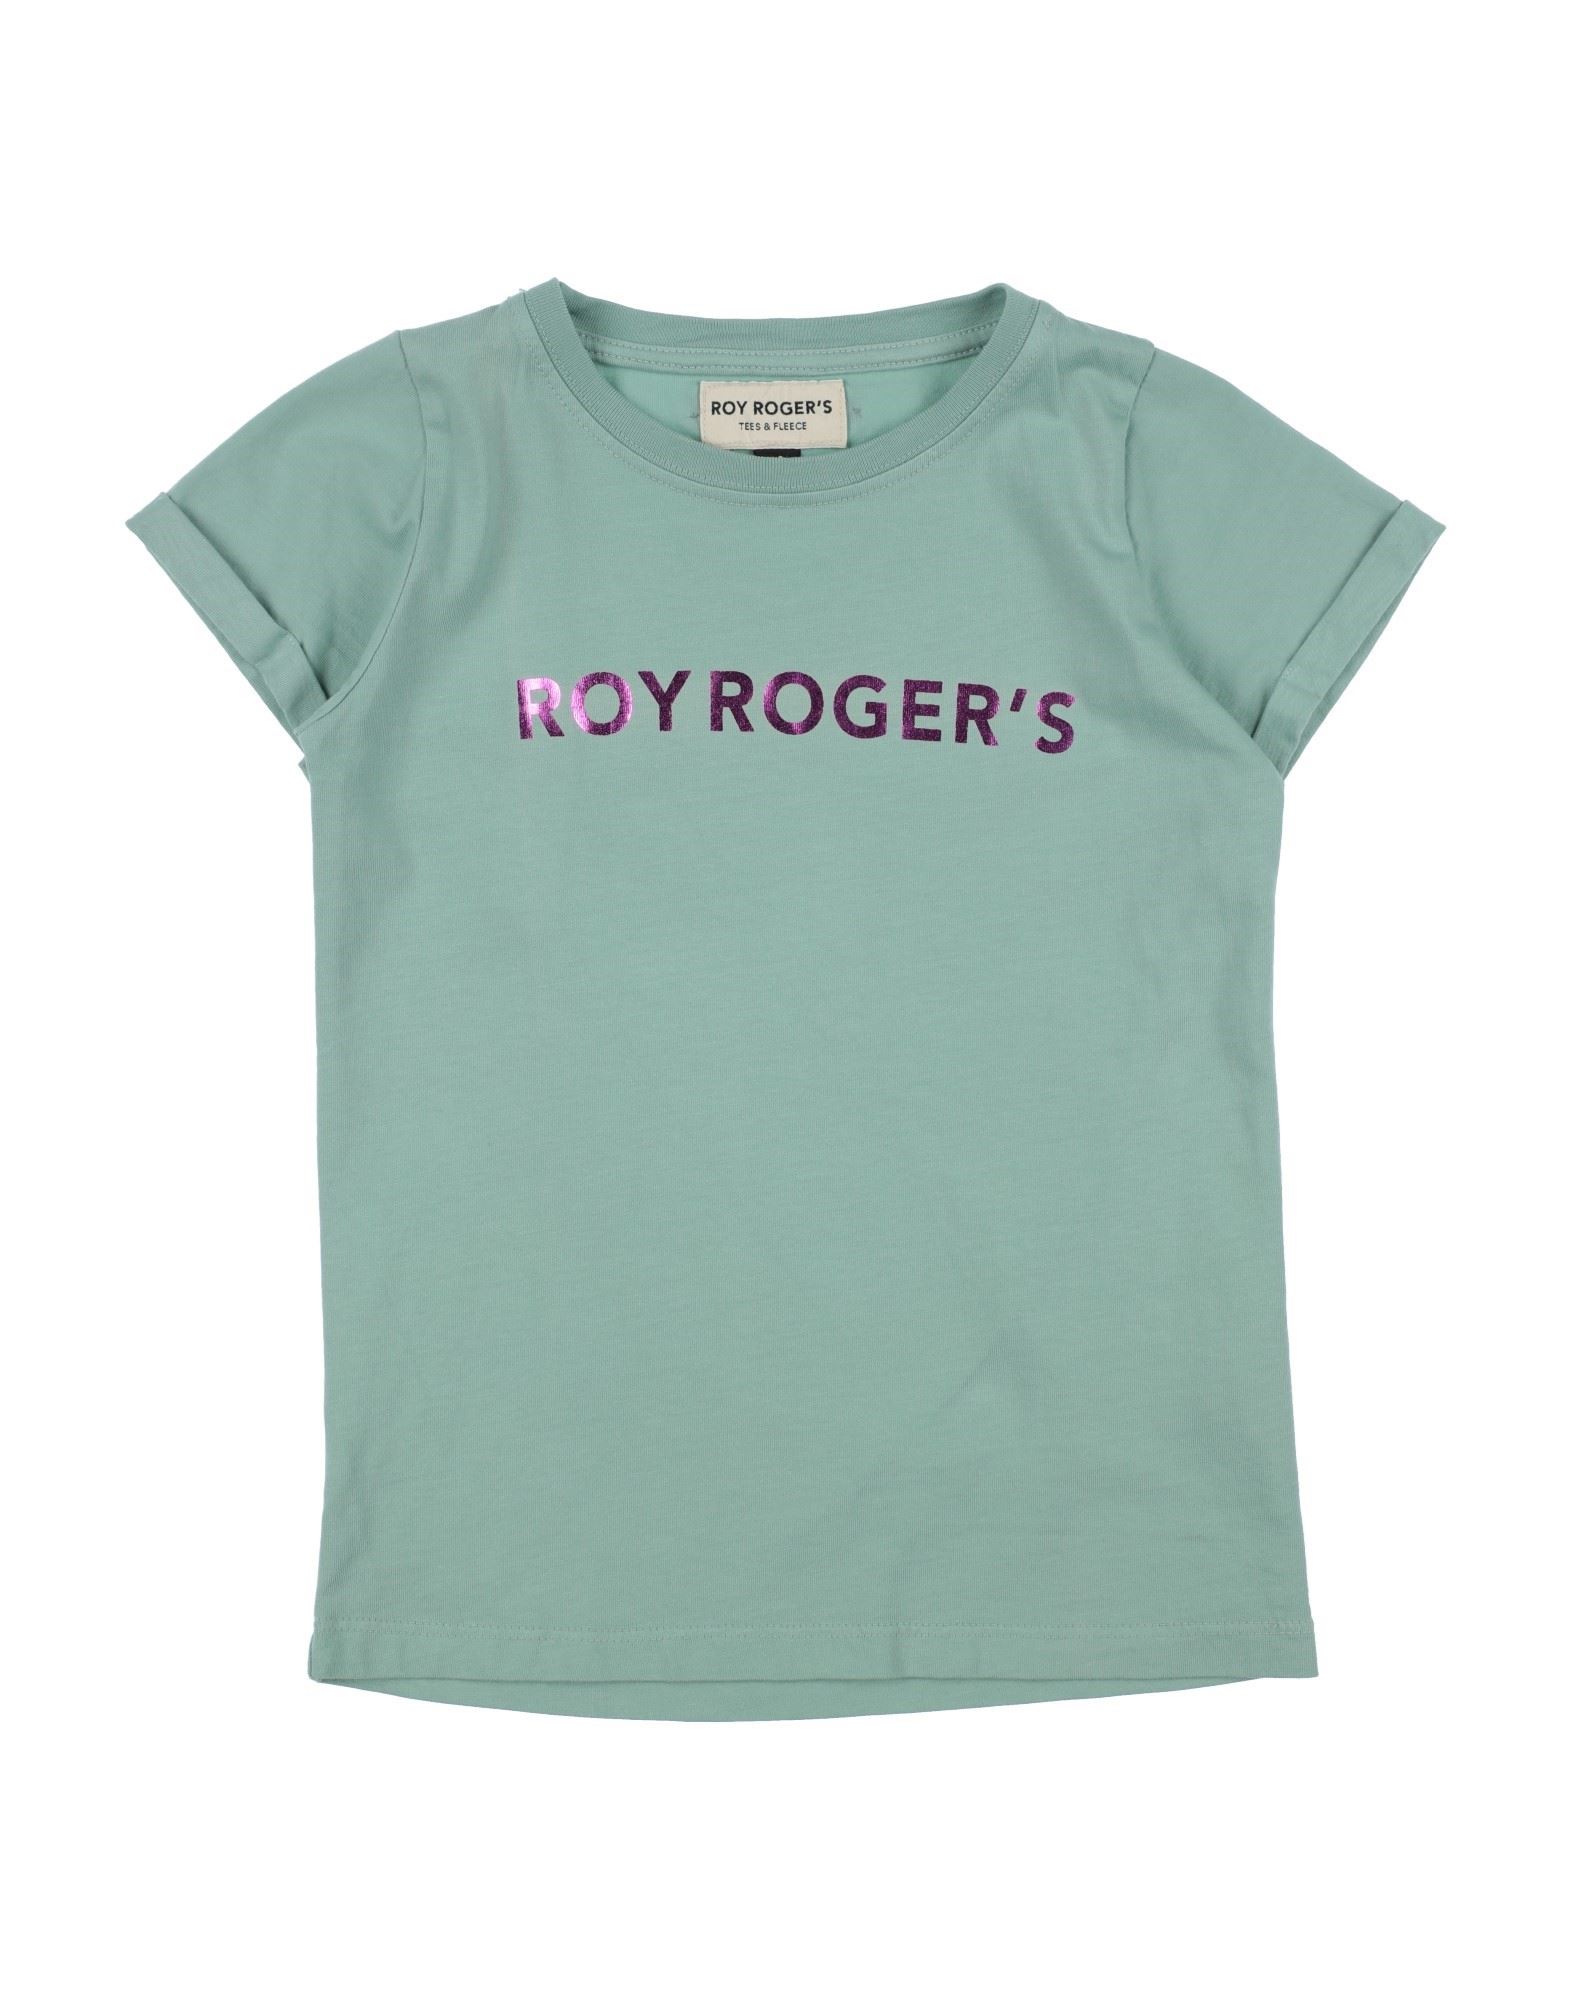 Roy Rogers Kids' Roÿ Roger's Toddler Girl T-shirt Sage Green Size 6 Cotton